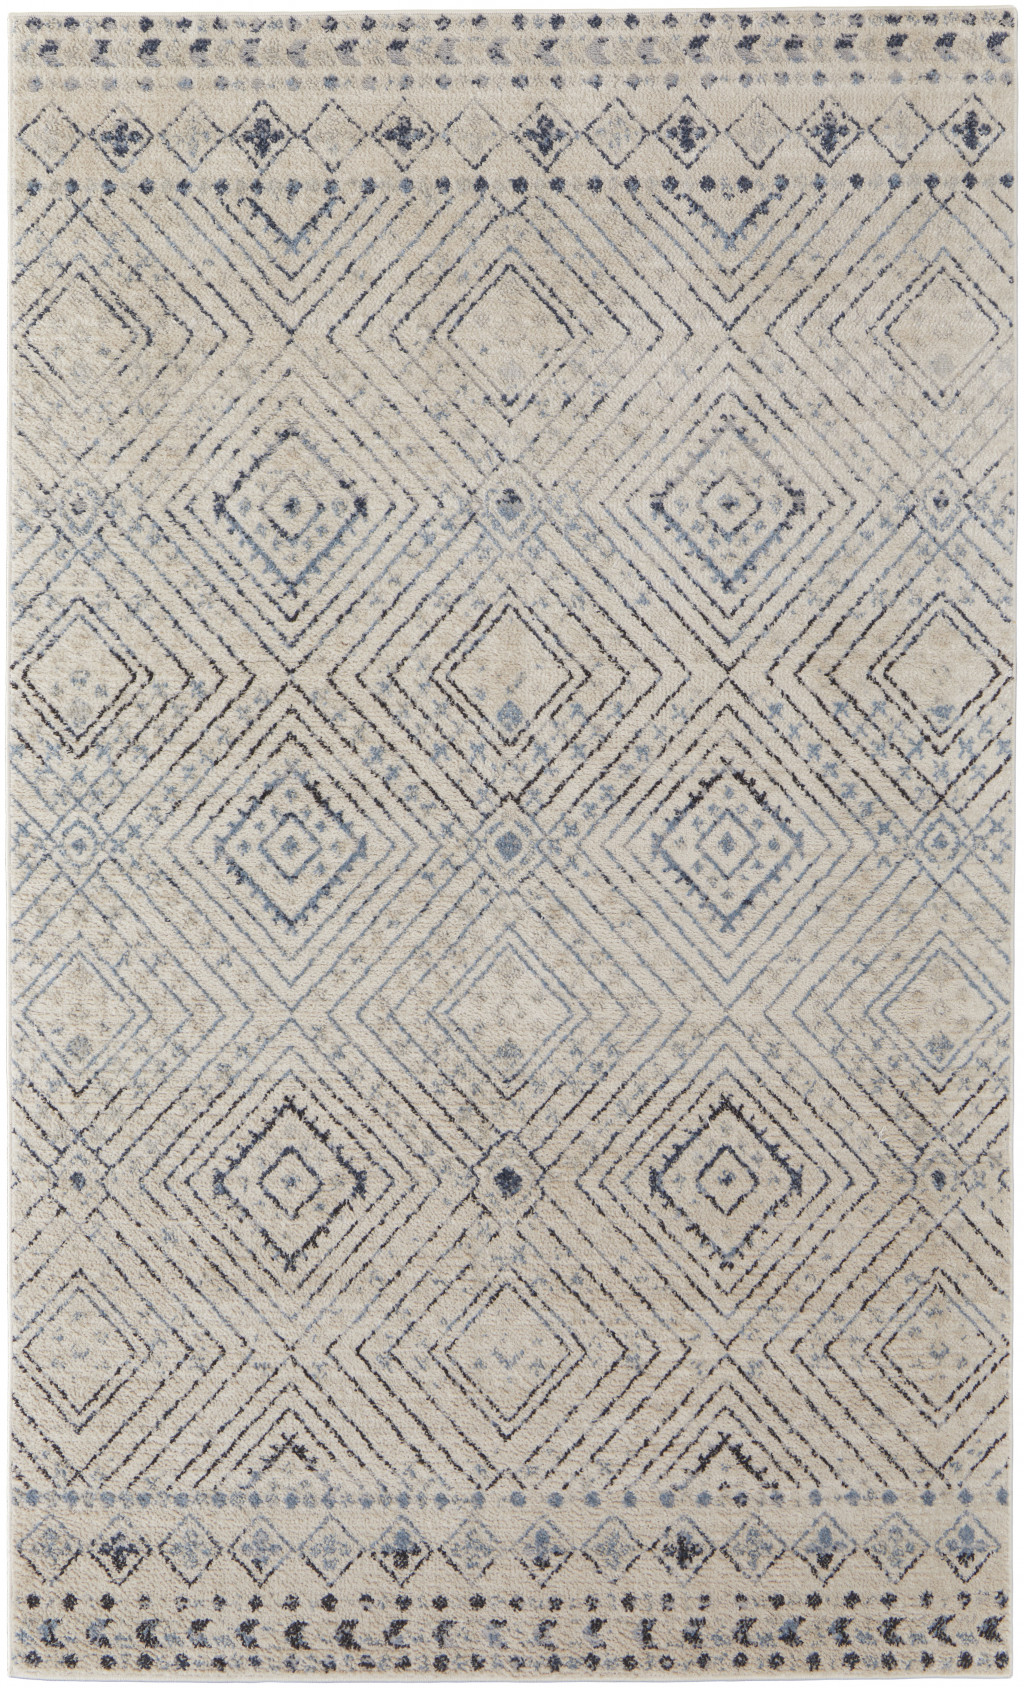 8' X 10' Ivory Blue And Gray Geometric Power Loom Distressed Area Rug-513299-1